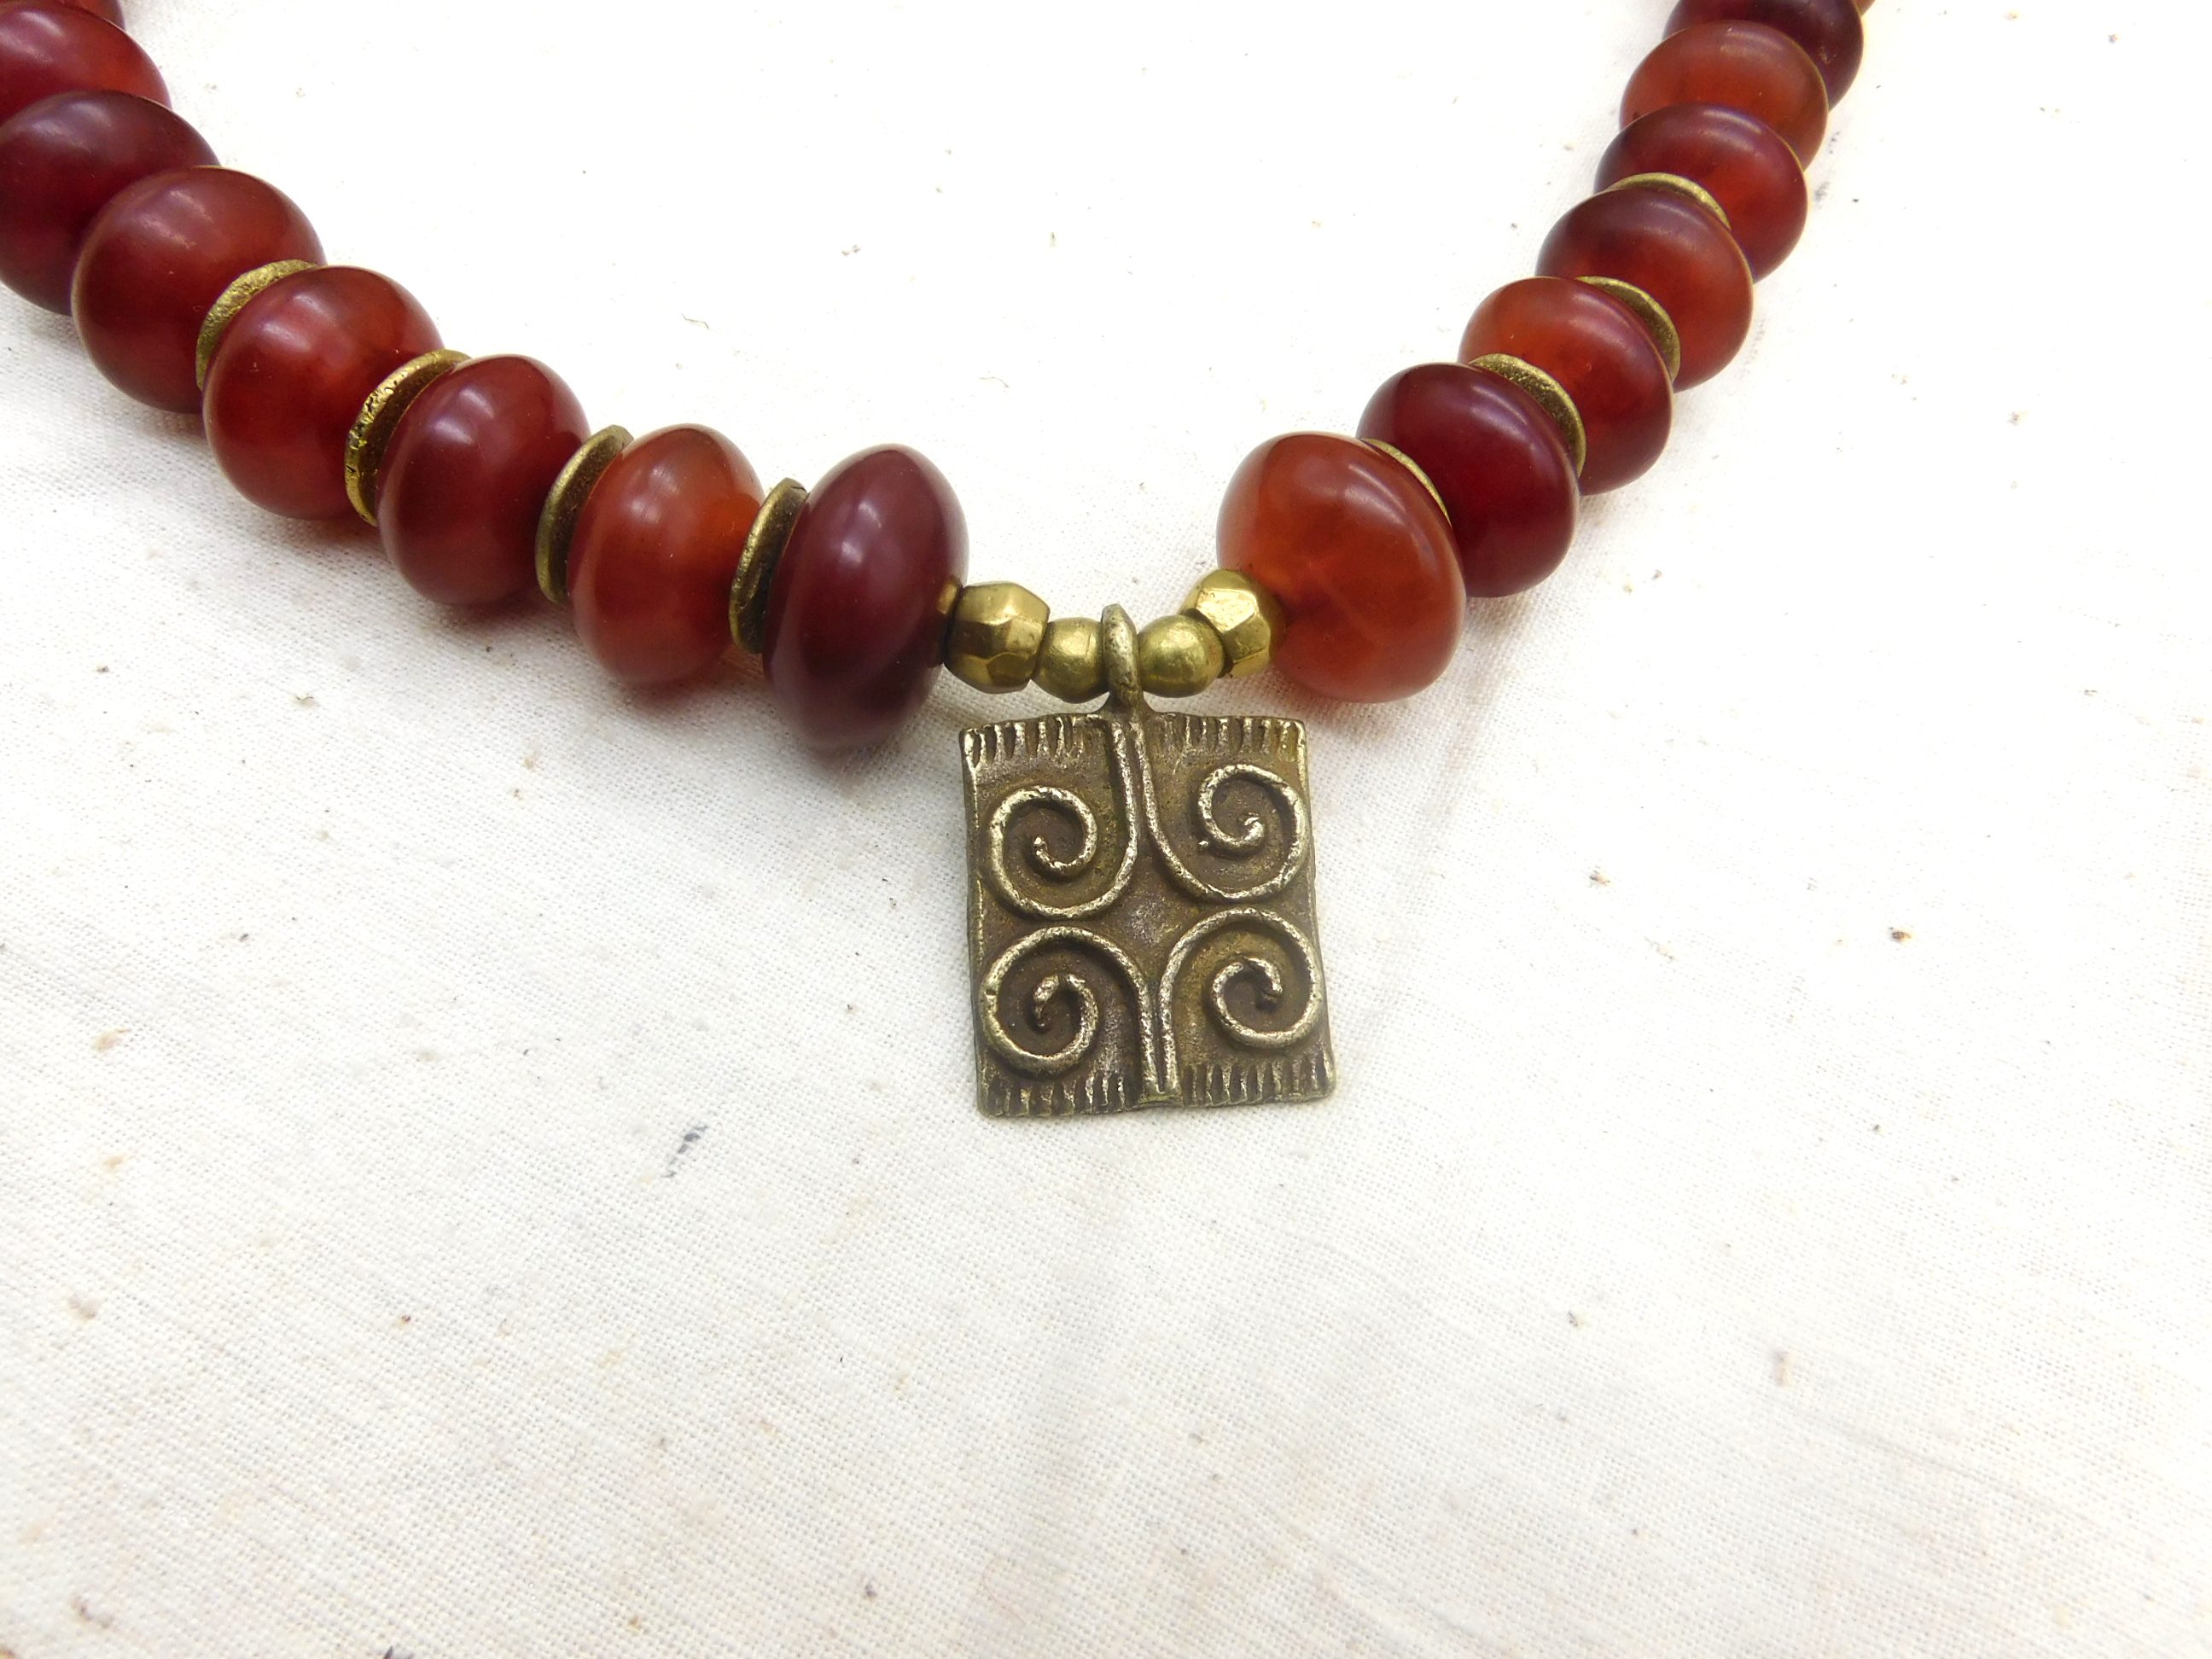 African inspired necklace with resin amber beads and a handmade brass pendant with a Sankofa symbol